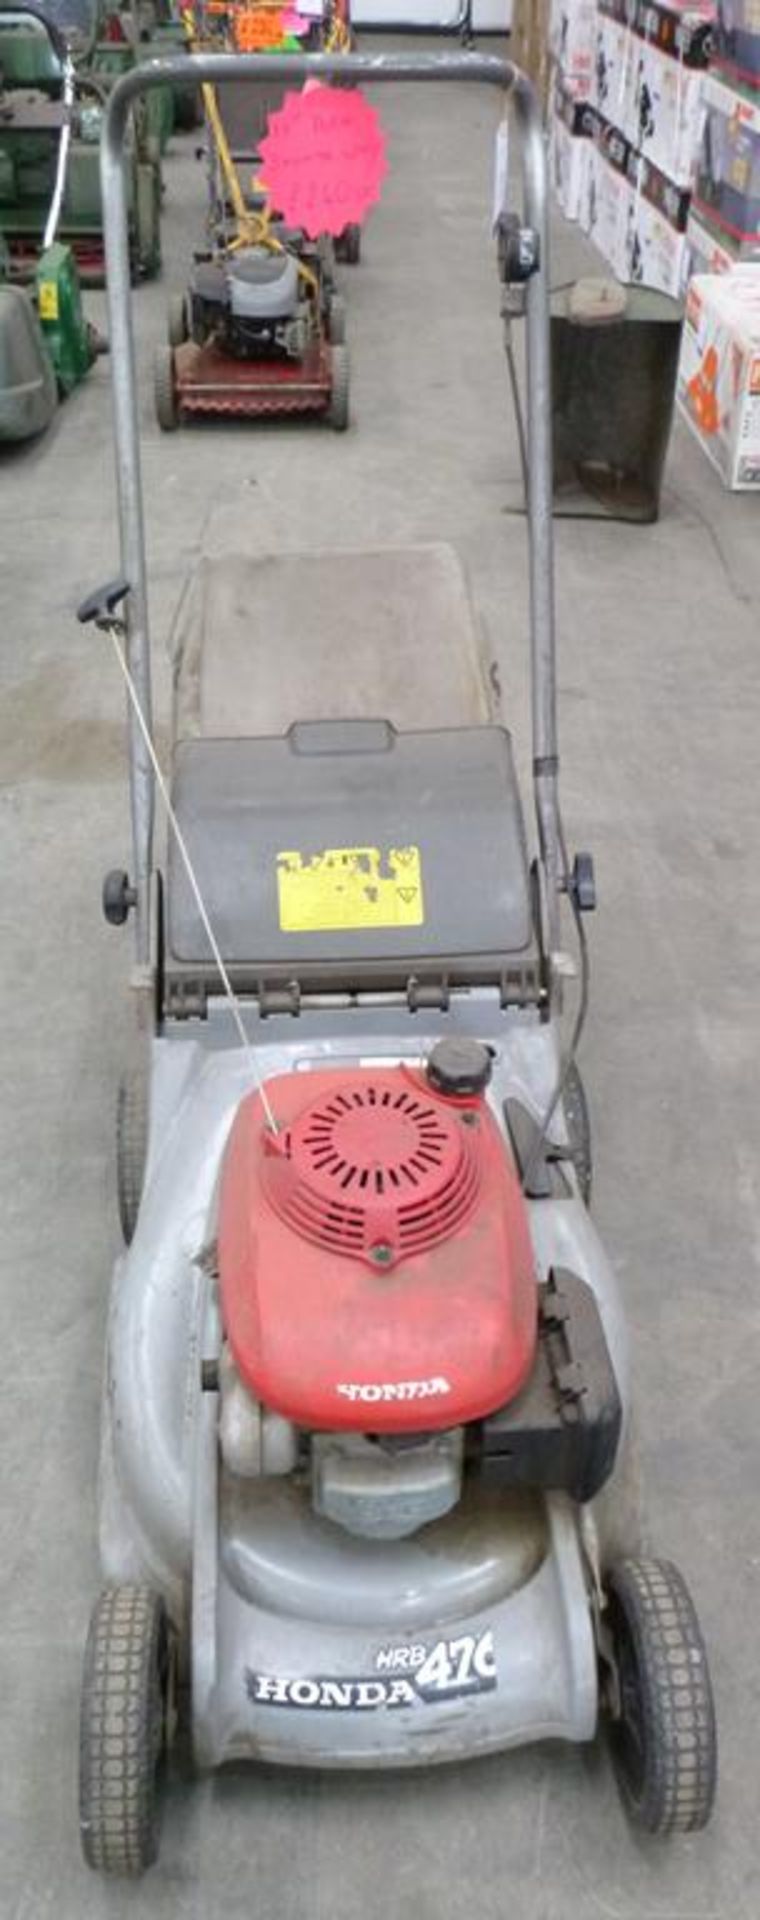 A Reconditioned Honda Powered HRB 476 Rotary Lawnmower. Shop Price £240. - Image 3 of 3